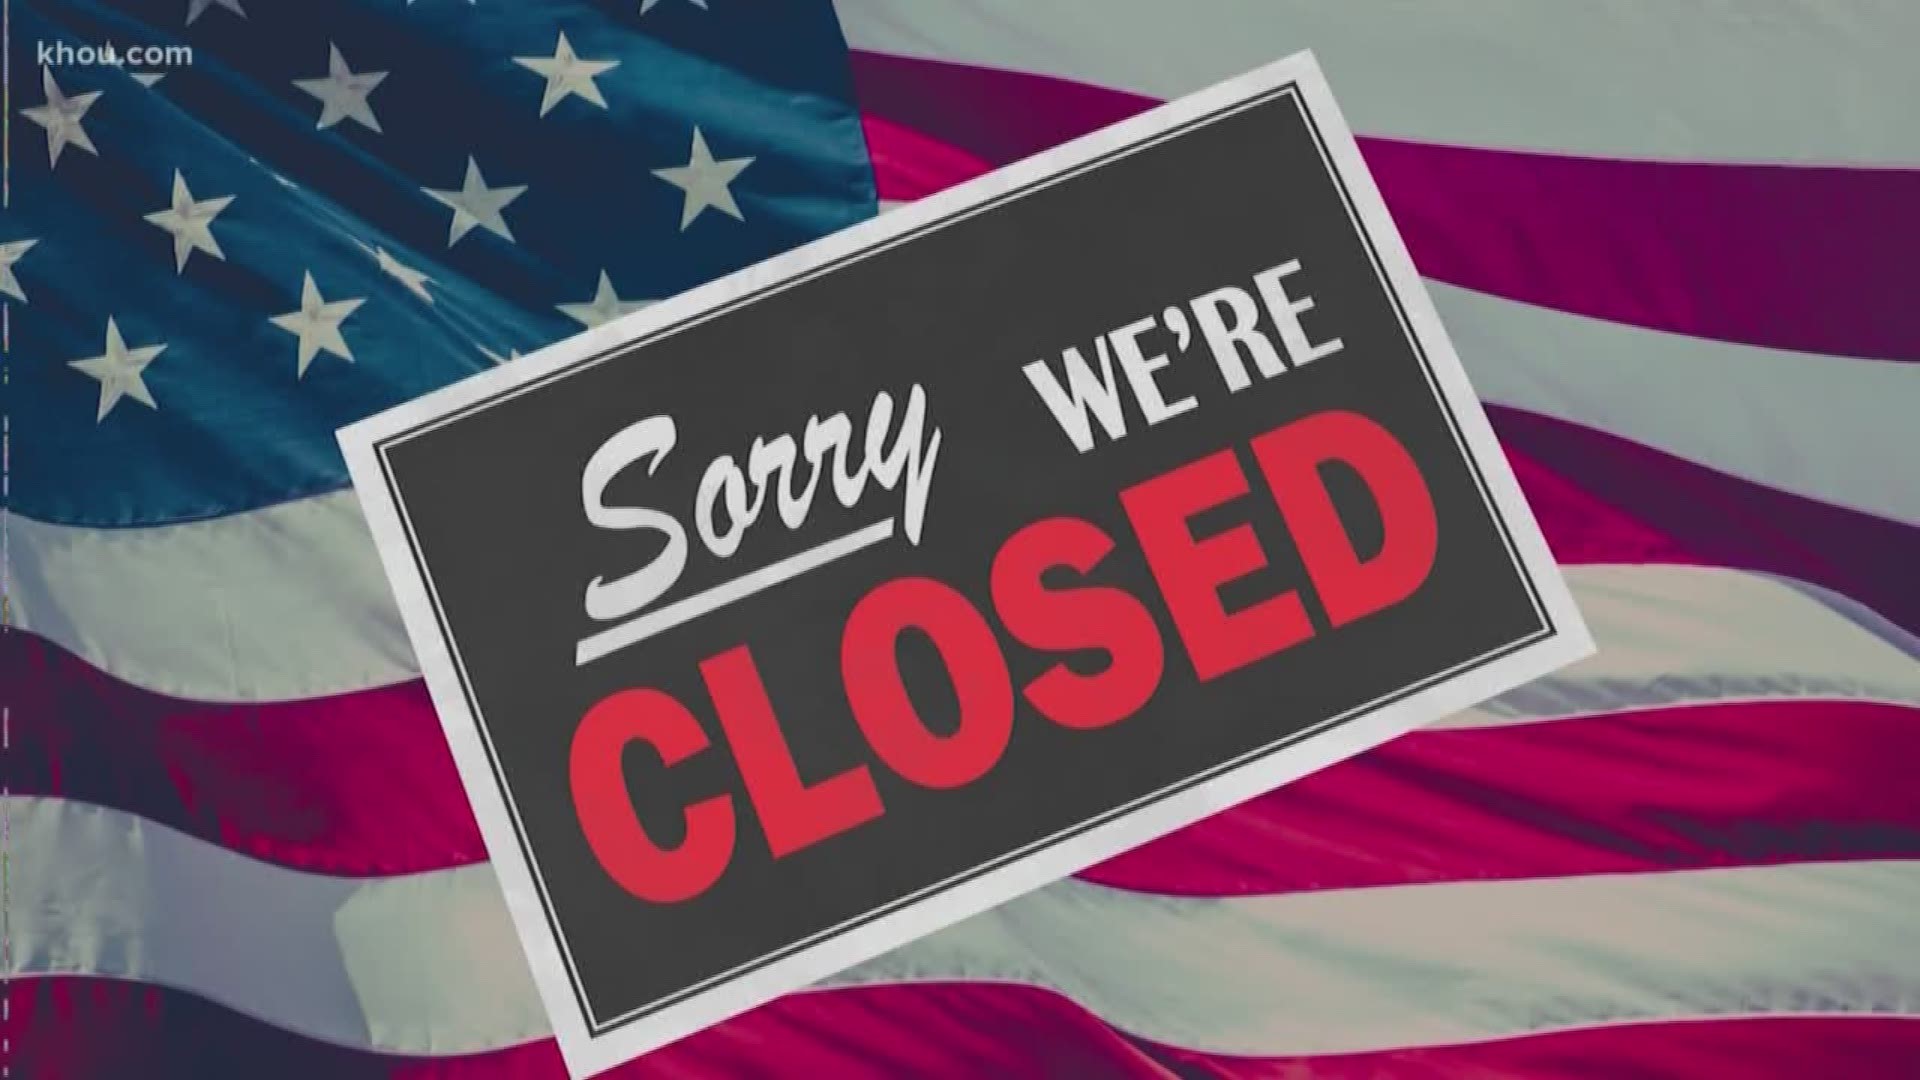 We know hundreds of thousands of government employees are directly affected by the government shutdown. But how is it affecting regular citizens? Janelle Bludau breaks it down.